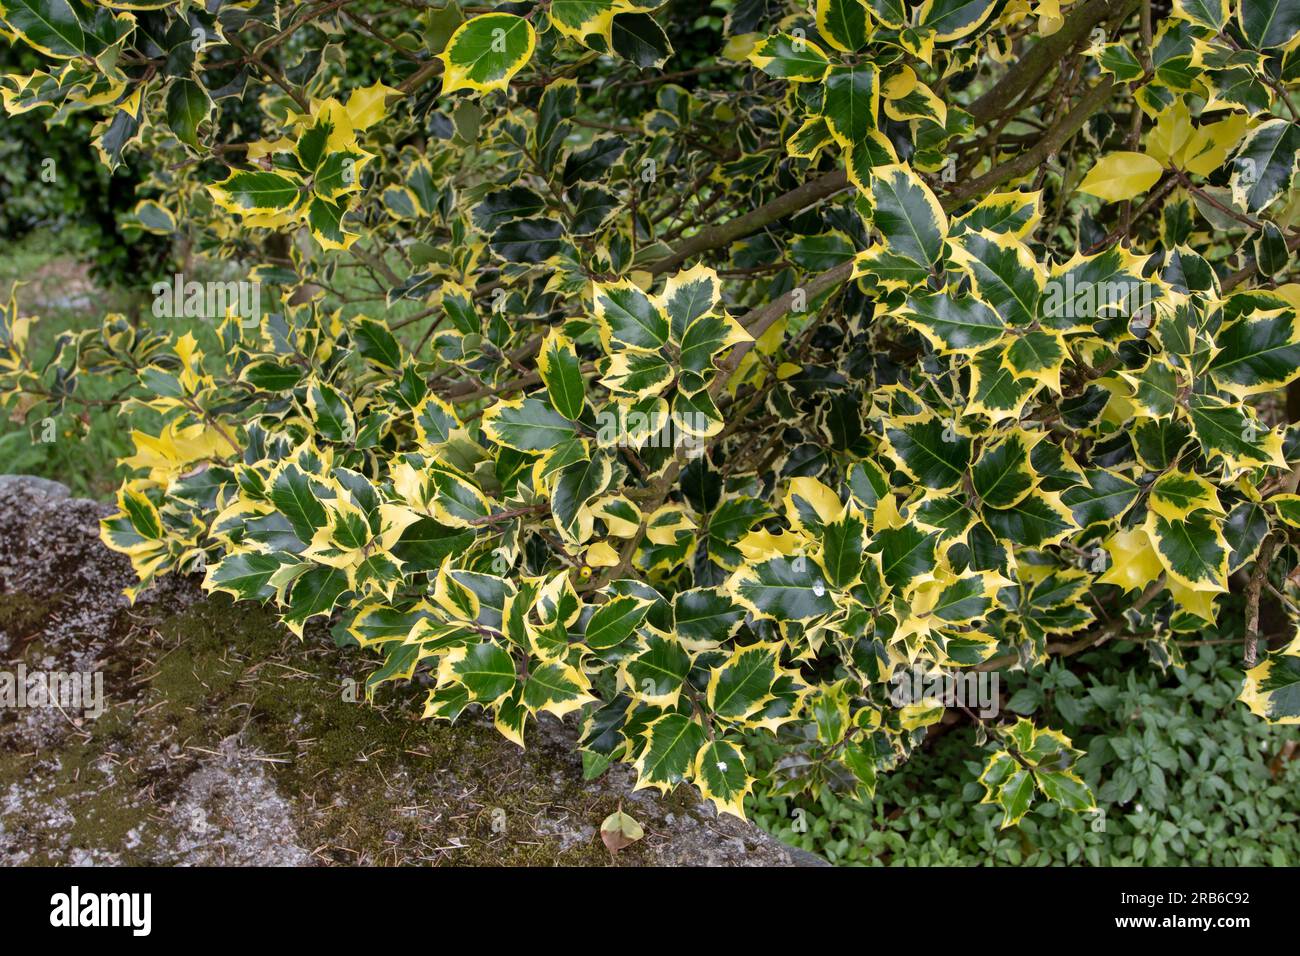 Christmas holly or Ilex aquifolium branches with yellow variegated leaves. Evergreen ornamental plant. Stock Photo